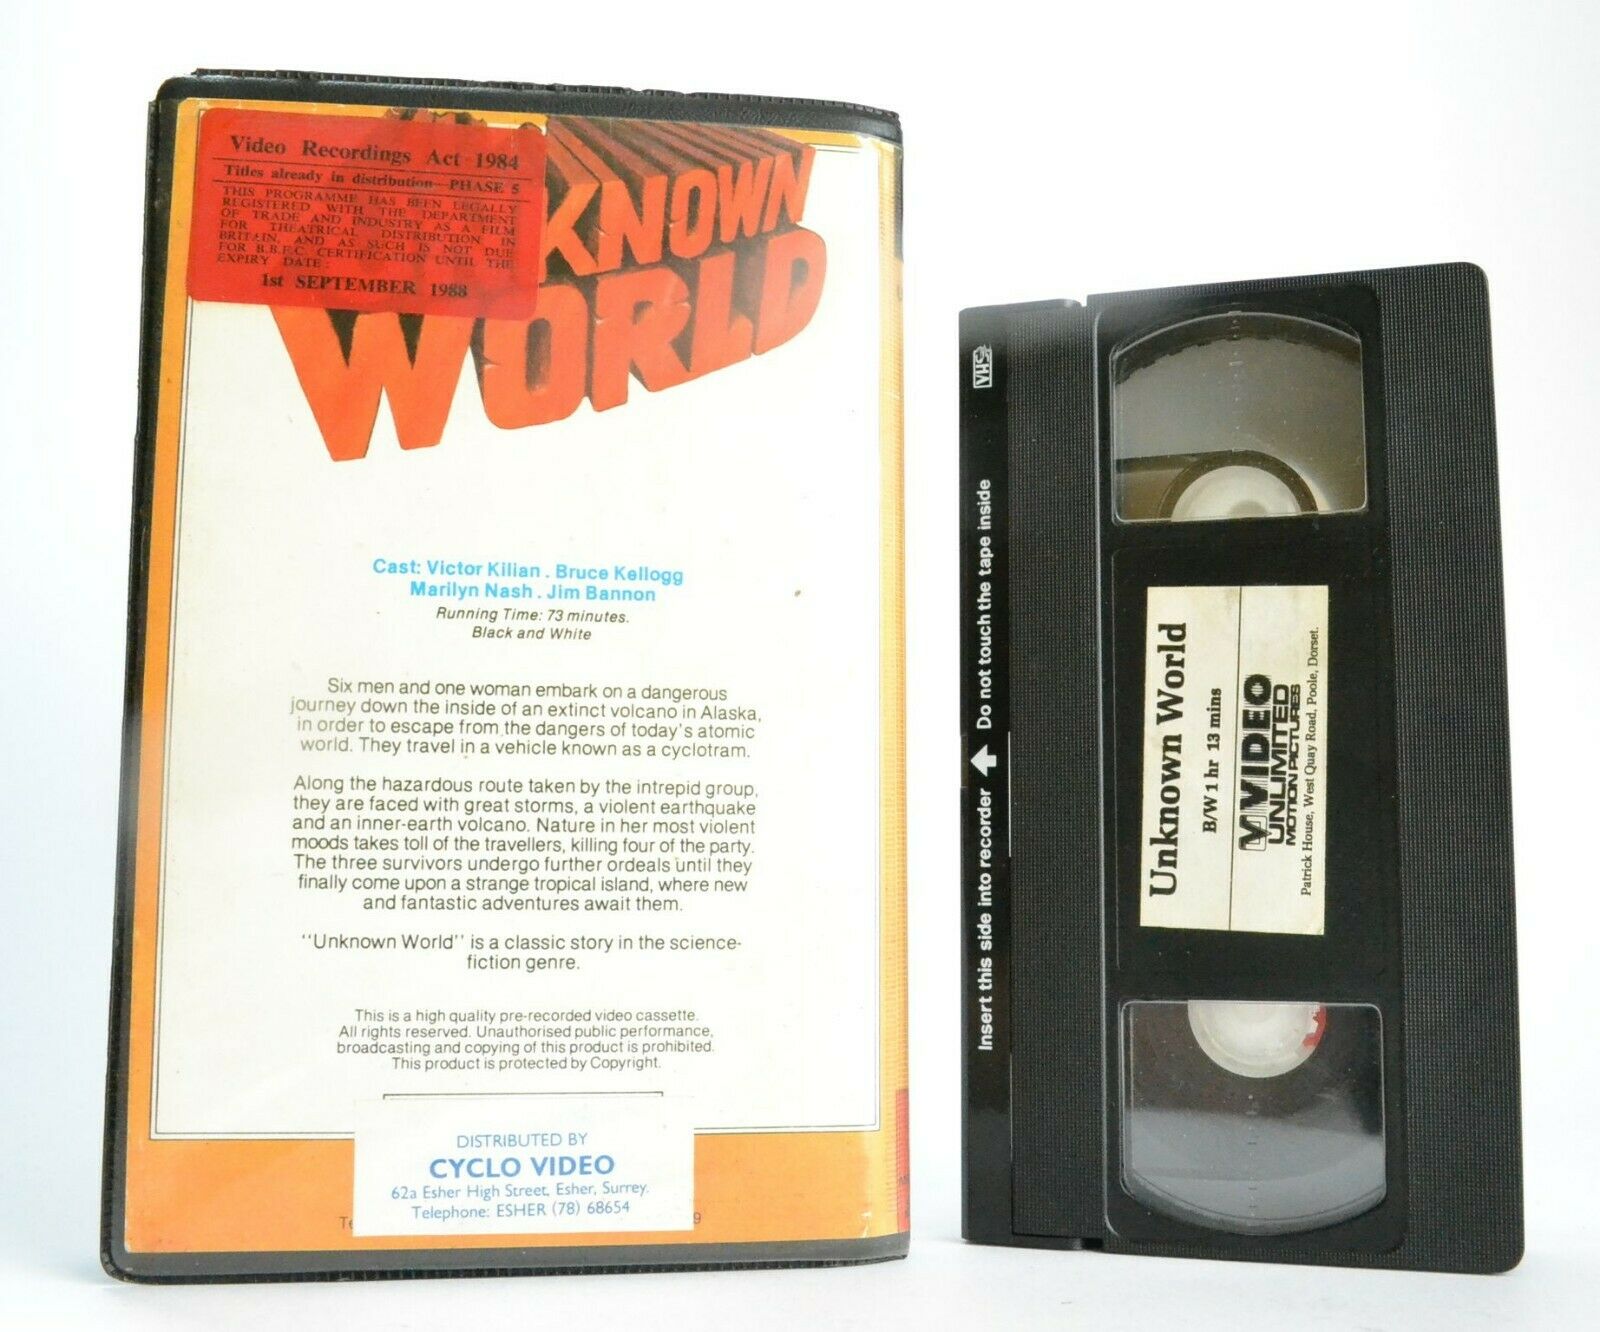 Unknown World: Night Without Stars [Video Unlimited Pre-Cert] 1951 Sci-Fi - VHS-